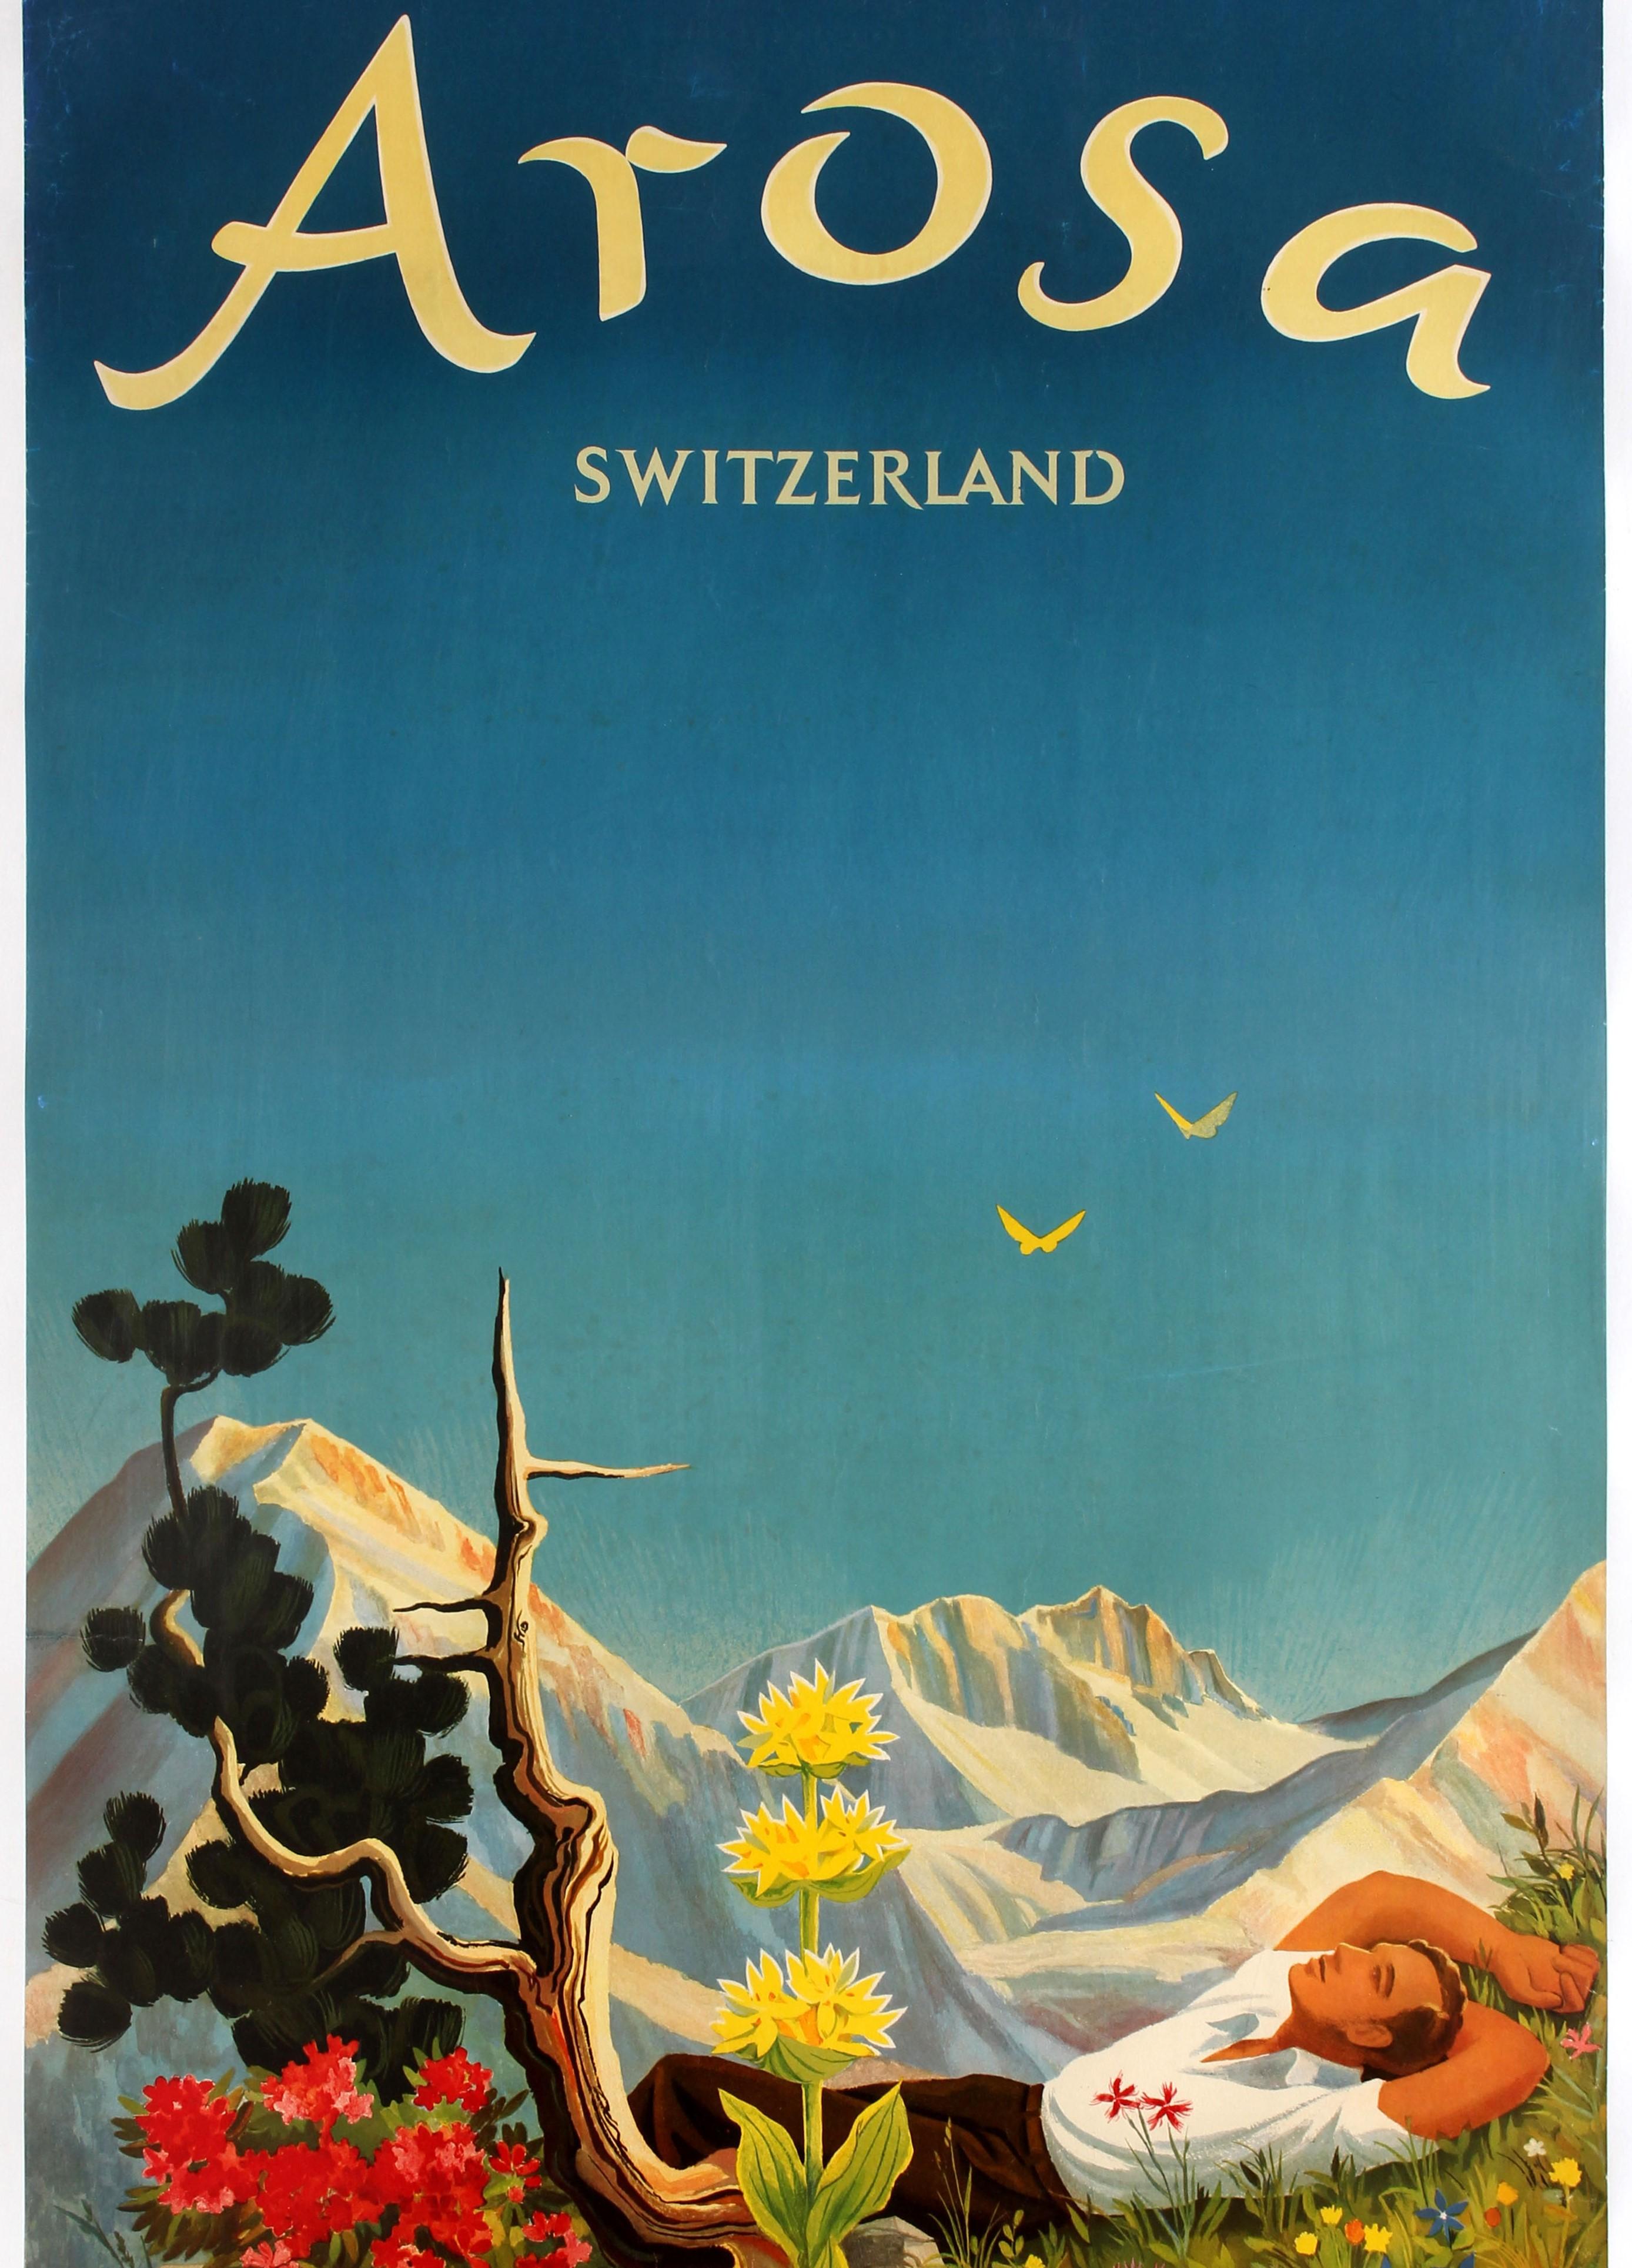 Original vintage travel poster for Arosa in the Swiss Alps featuring colourful artwork by Hans Aeschbach (1911-1999) depicting a hiker lying on the grass under a bright blue sky with a tree and flowers in the foreground, two yellow birds in the sky